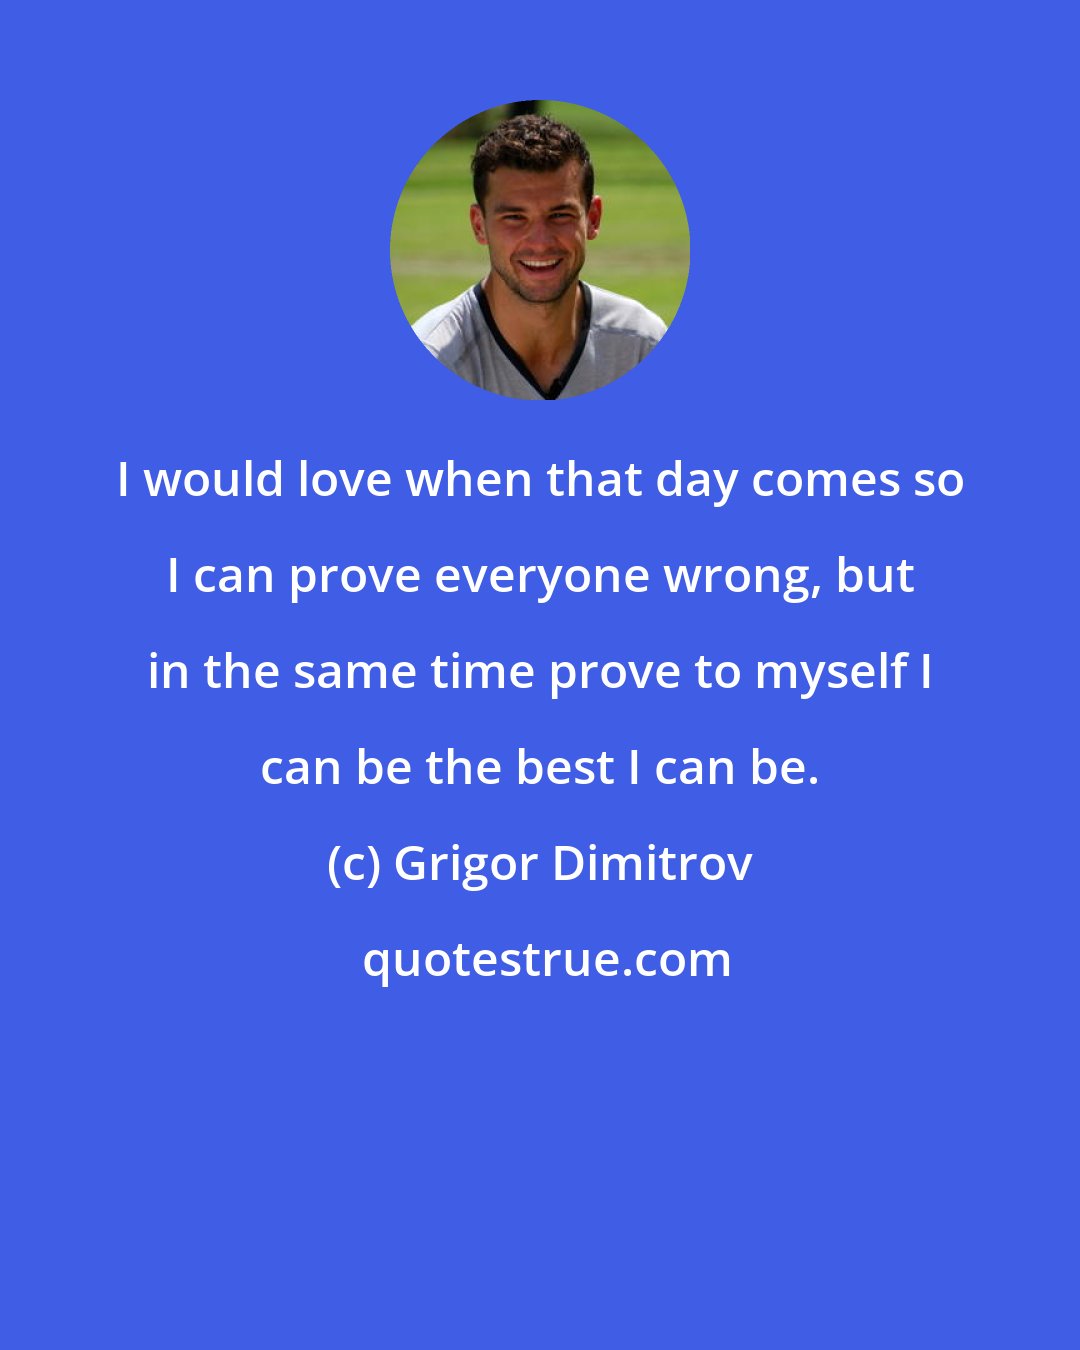 Grigor Dimitrov: I would love when that day comes so I can prove everyone wrong, but in the same time prove to myself I can be the best I can be.